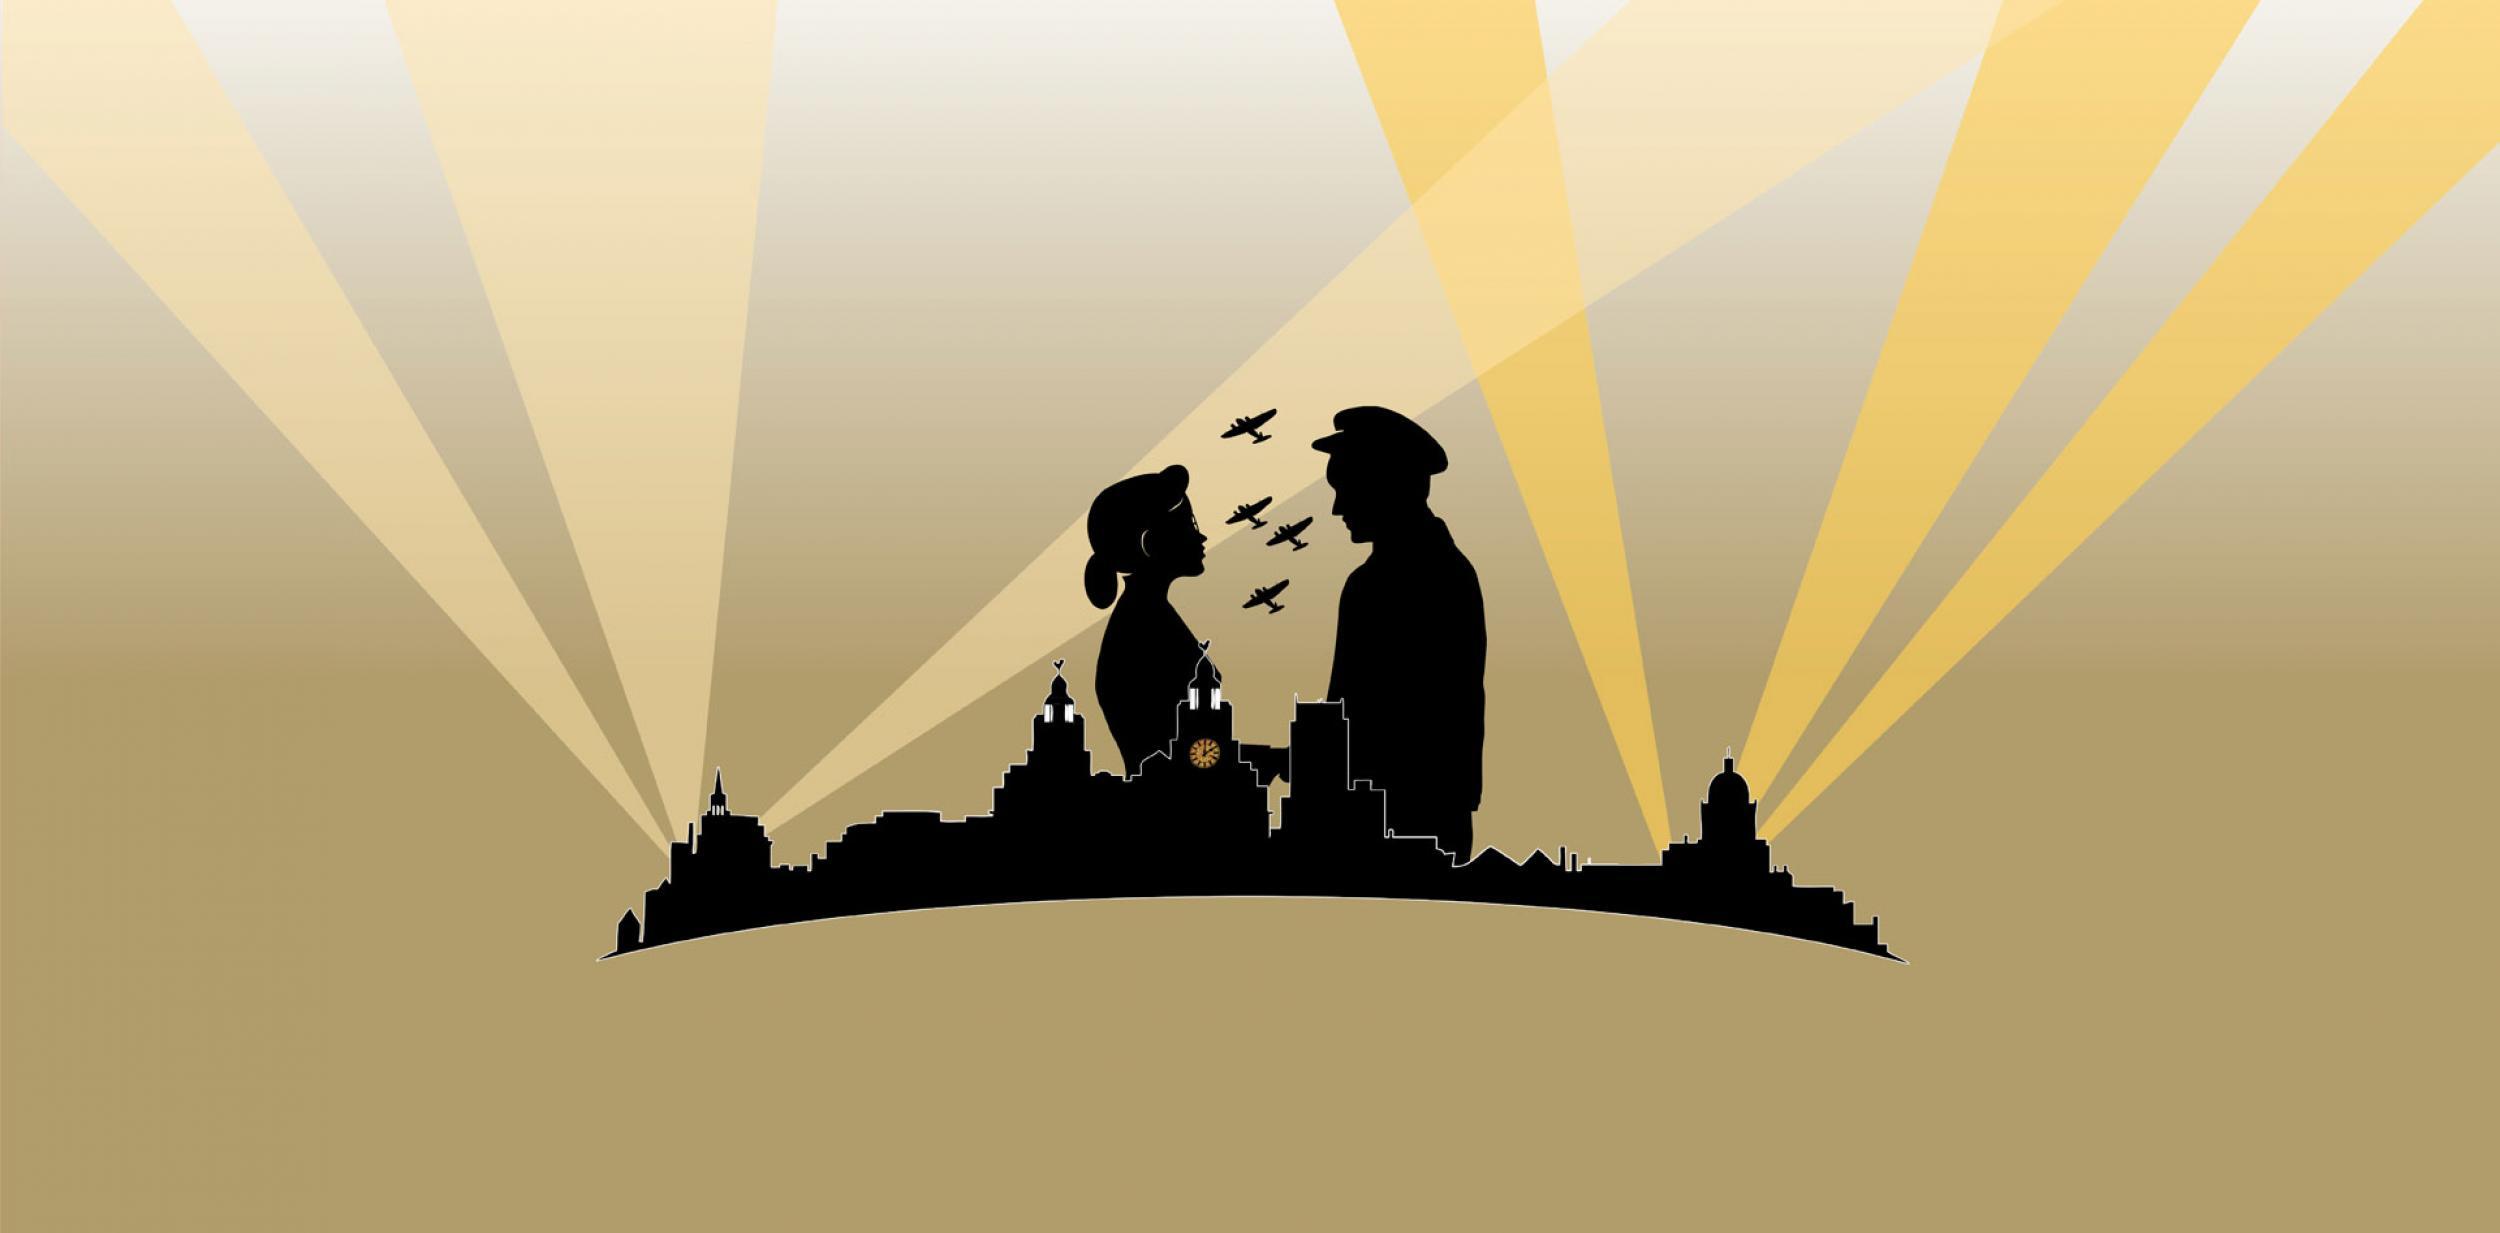 Illustration showing a silhouette of a man and woman facing each other, above a city skyline surrounded by searchlights.